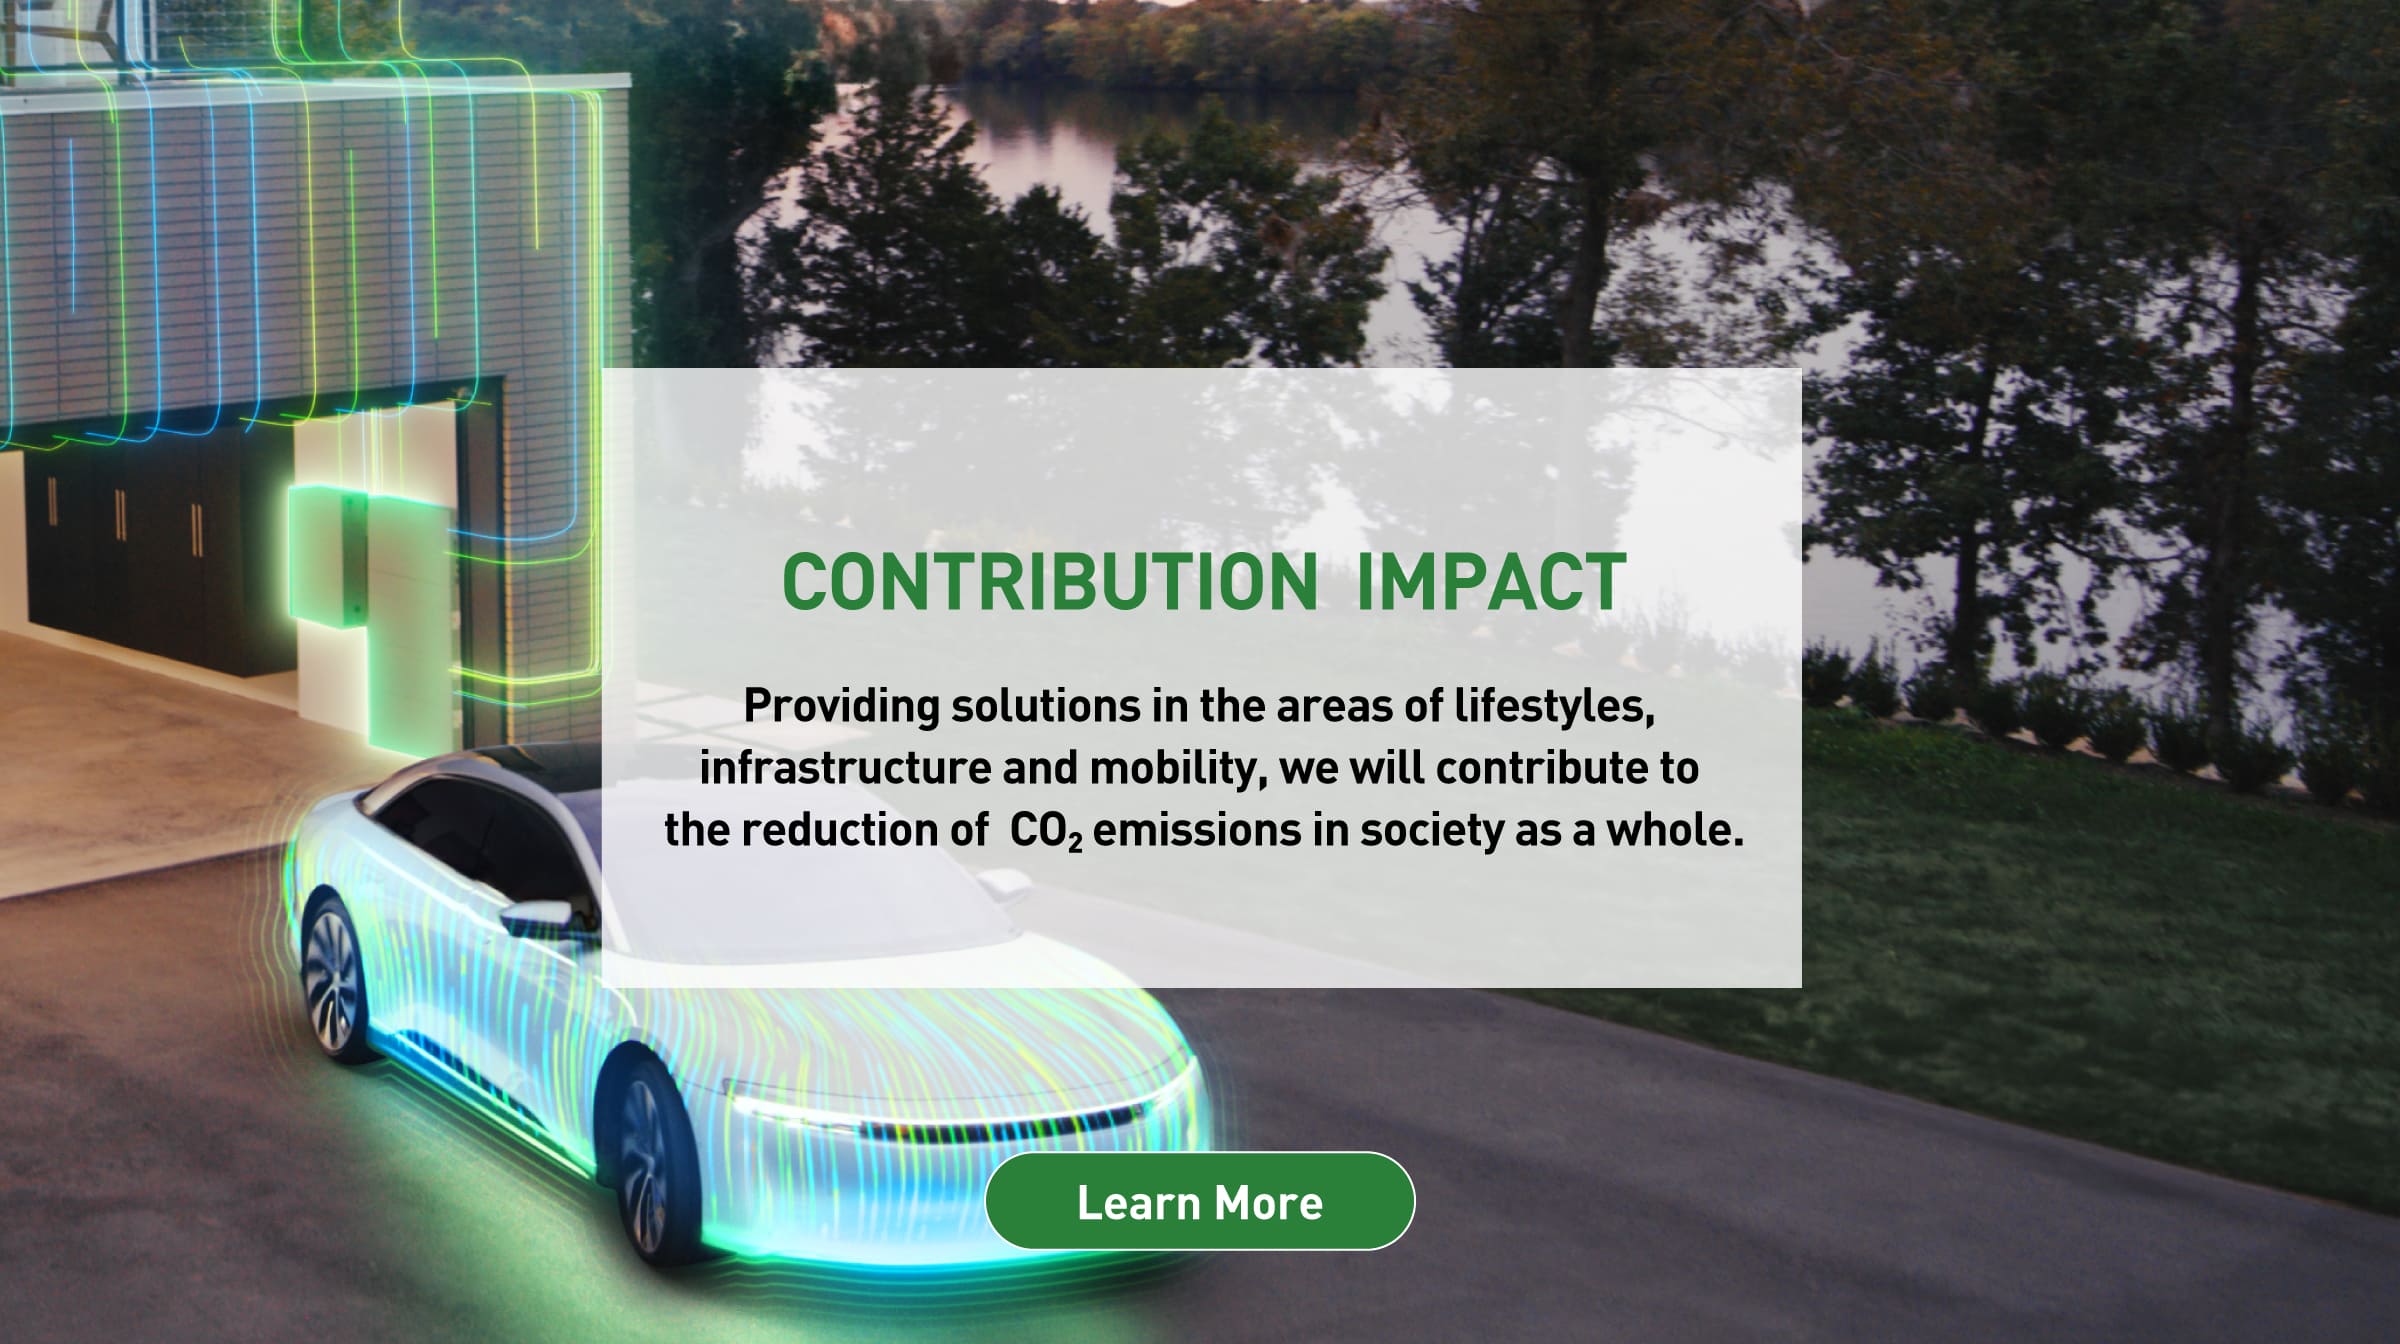 CONTRIBUTION IMPACT: Providing solutions in the areas of lifestyles, infrastructure and mobility, we will contribute to the reduction of CO2 emissions in society as a whole. Background photo: CGI image of an electric vehicle. Learn more.